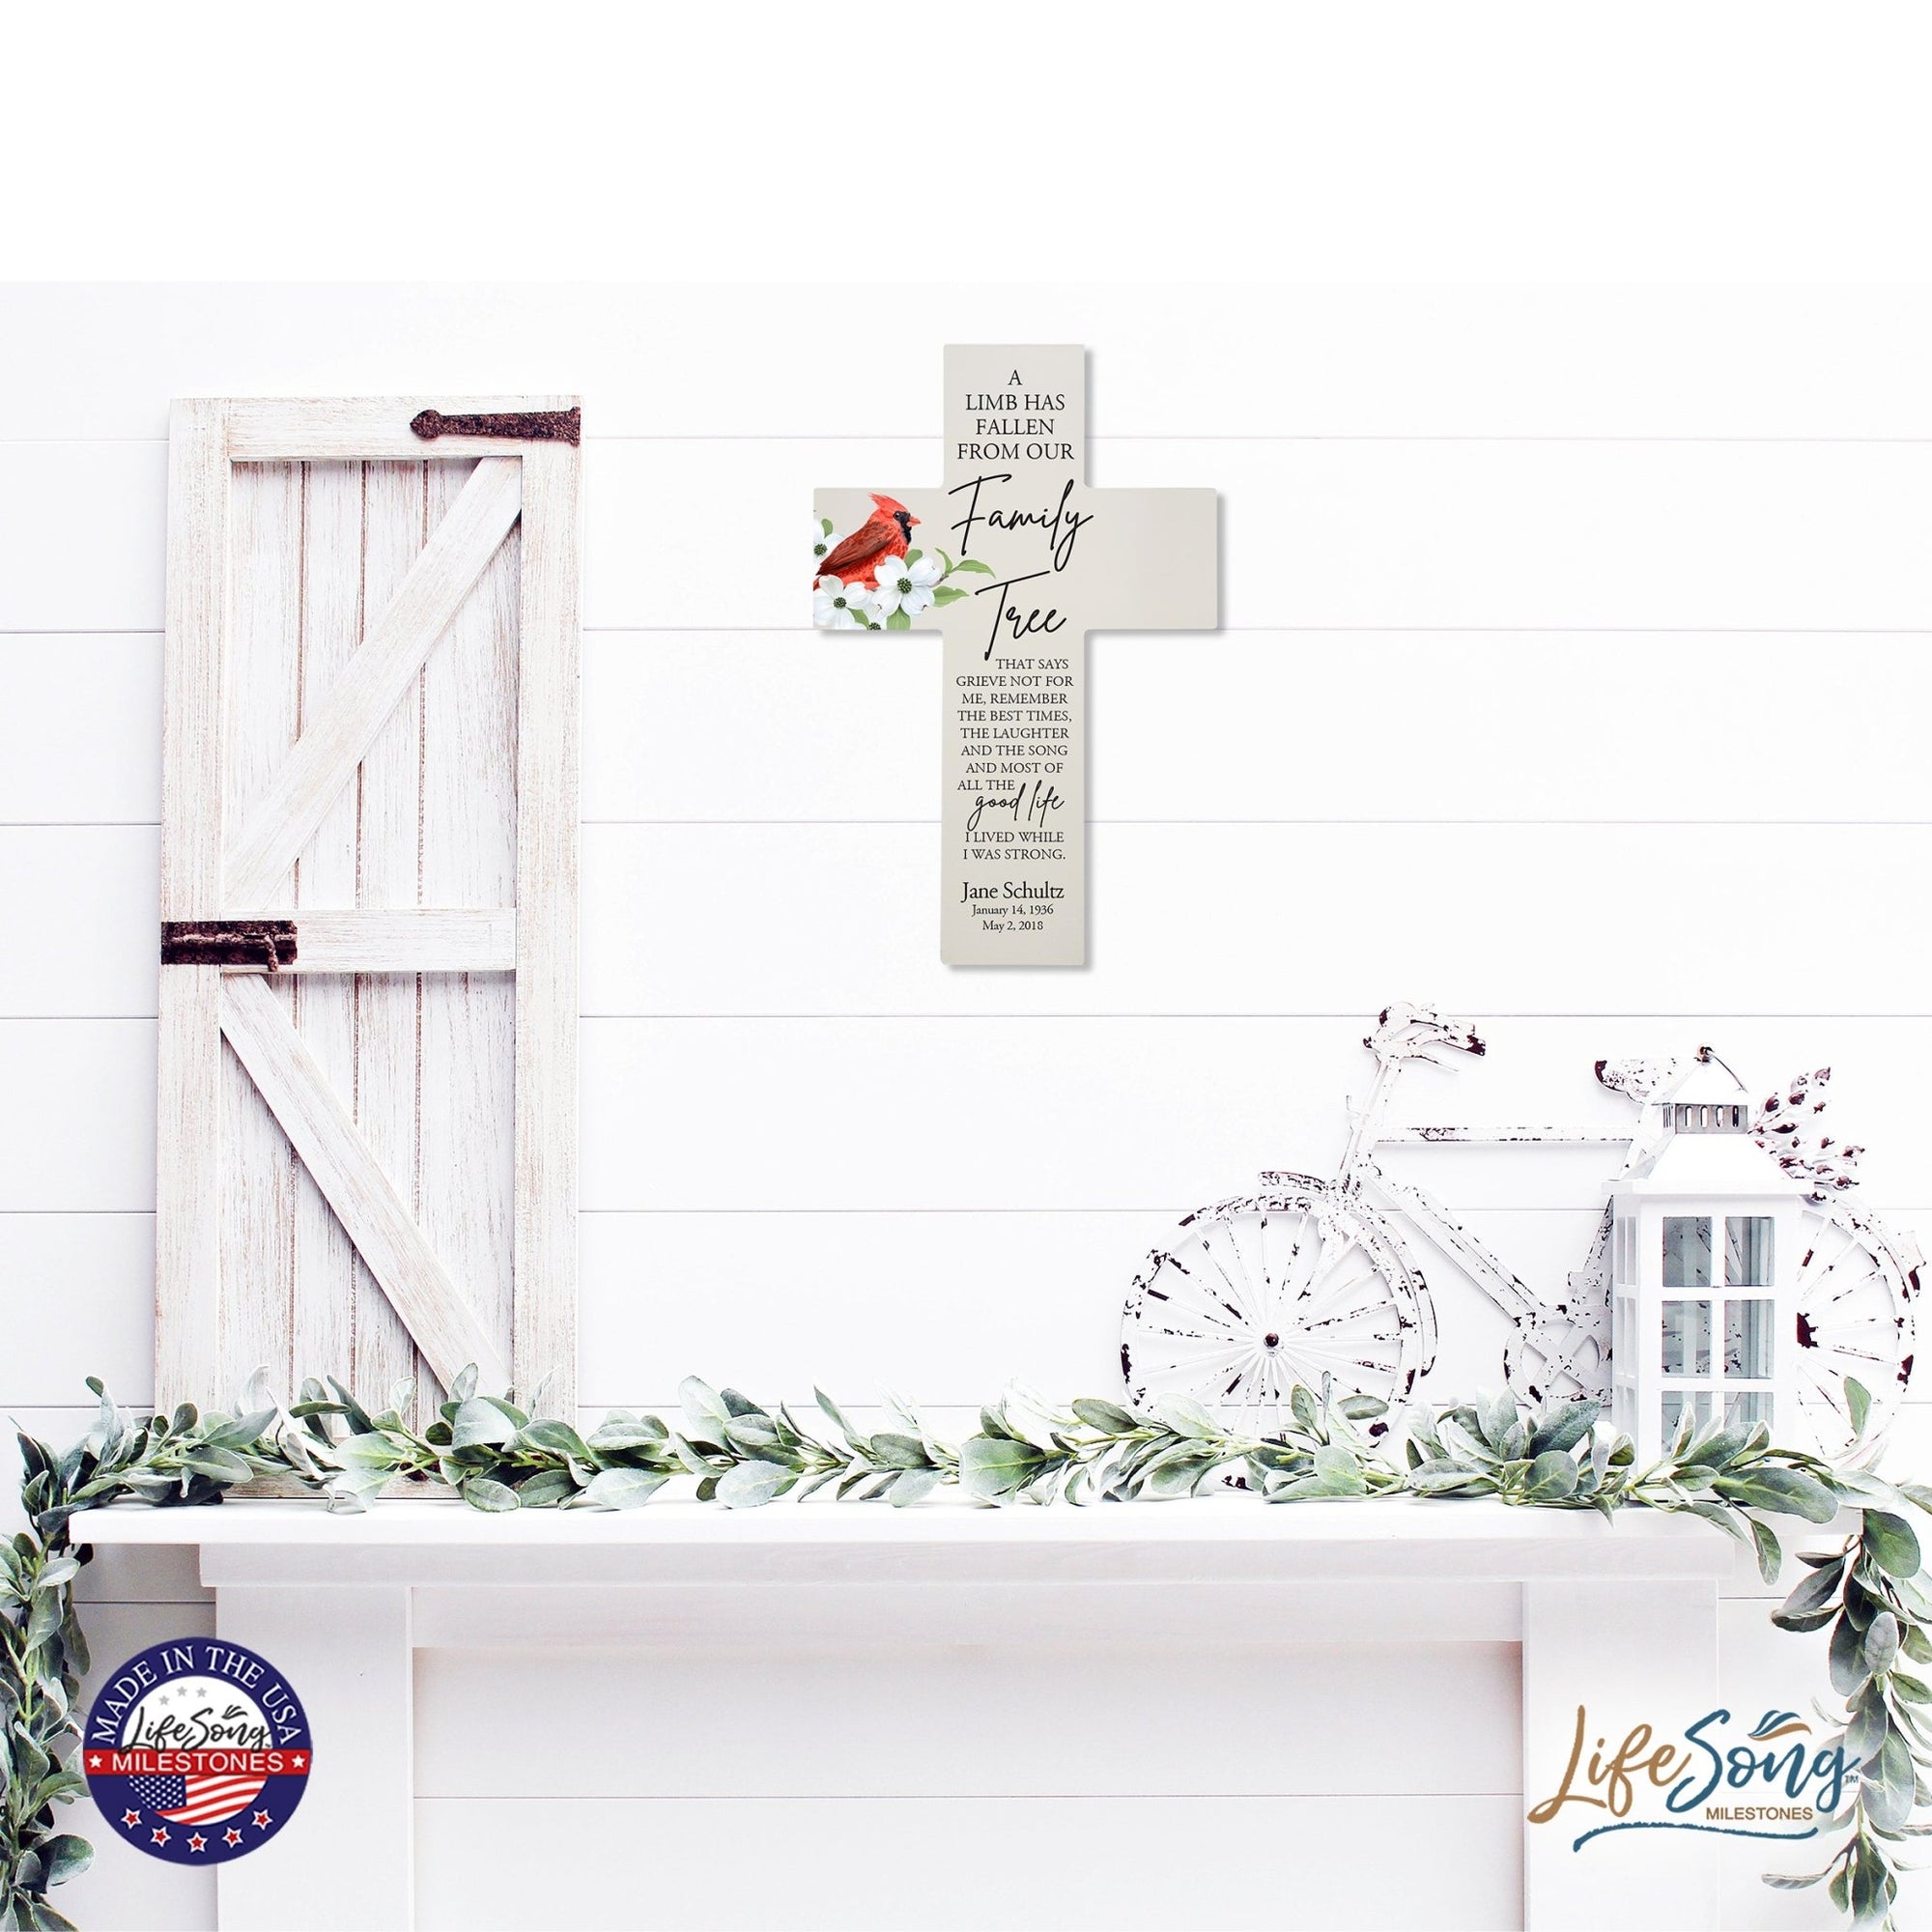 Personalized Red Cardinal Memorial Bereavement Wall Cross For Loss of Loved One A Limb Has Fallen (Cardinal) Quote 14 x 9.25 A Limb Has Fallen From Our Family Tree - LifeSong Milestones